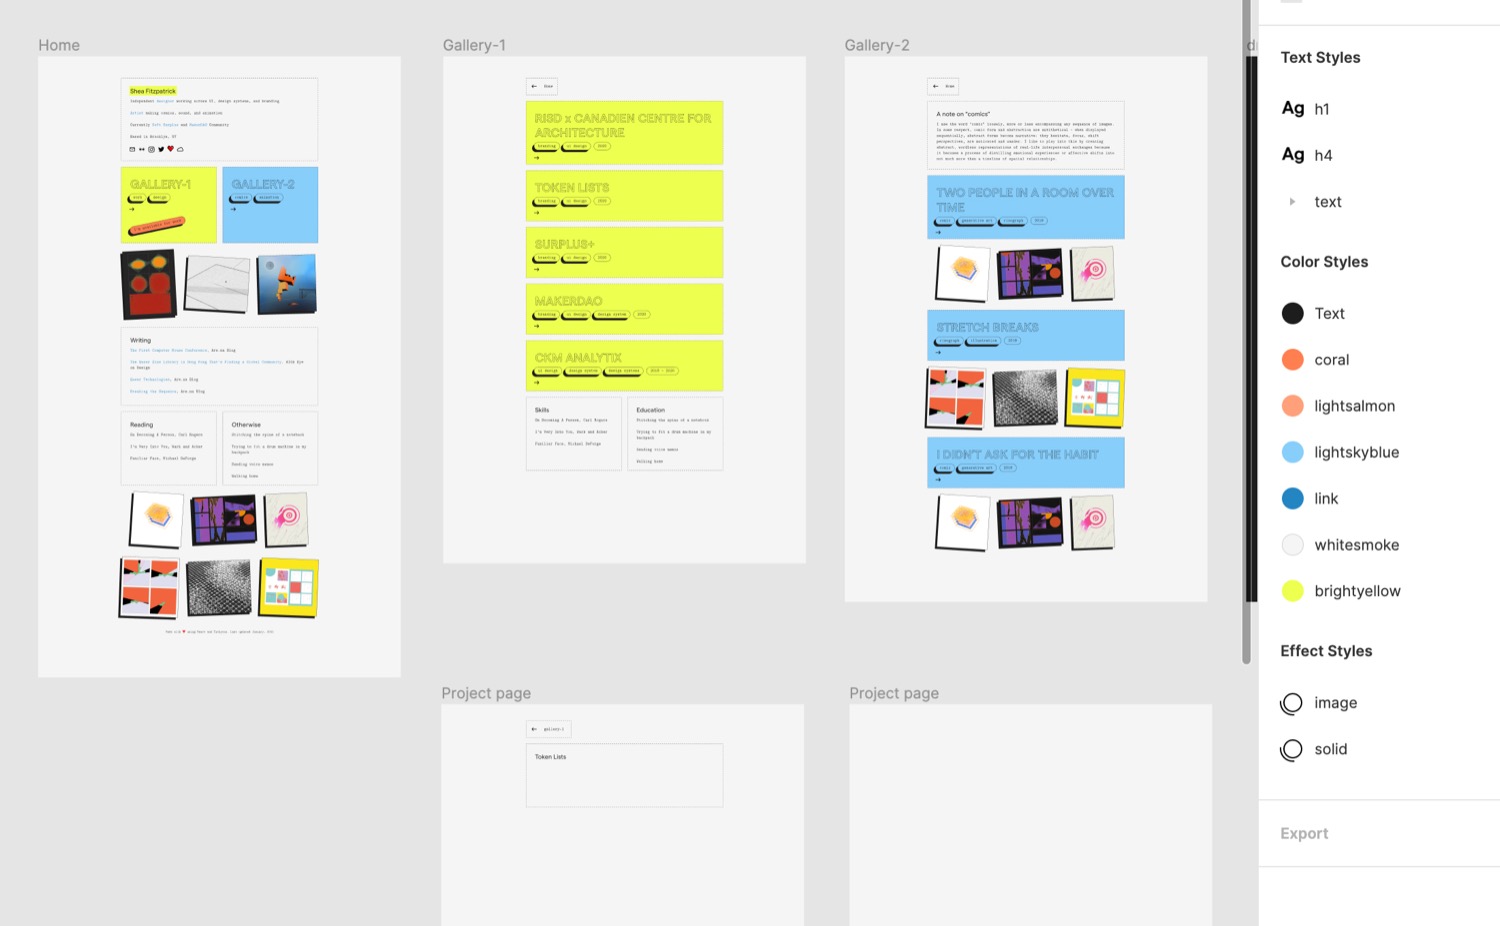 A screenshot of Shea's projects in Notion.